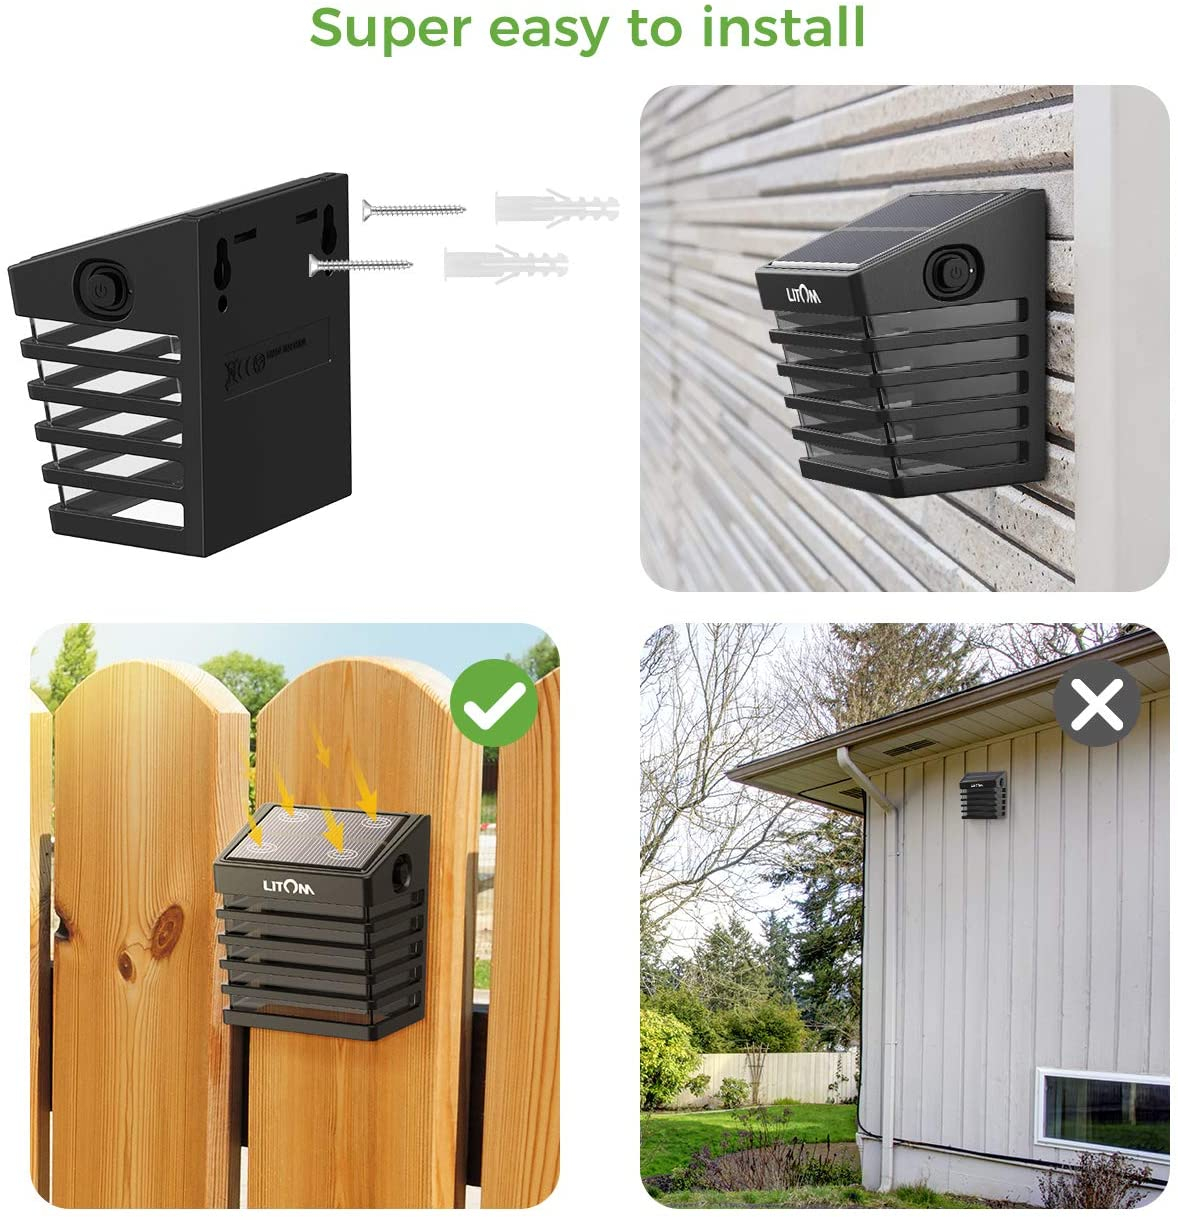 Outdoor Fence Lights (4 Pack) showing easy installation